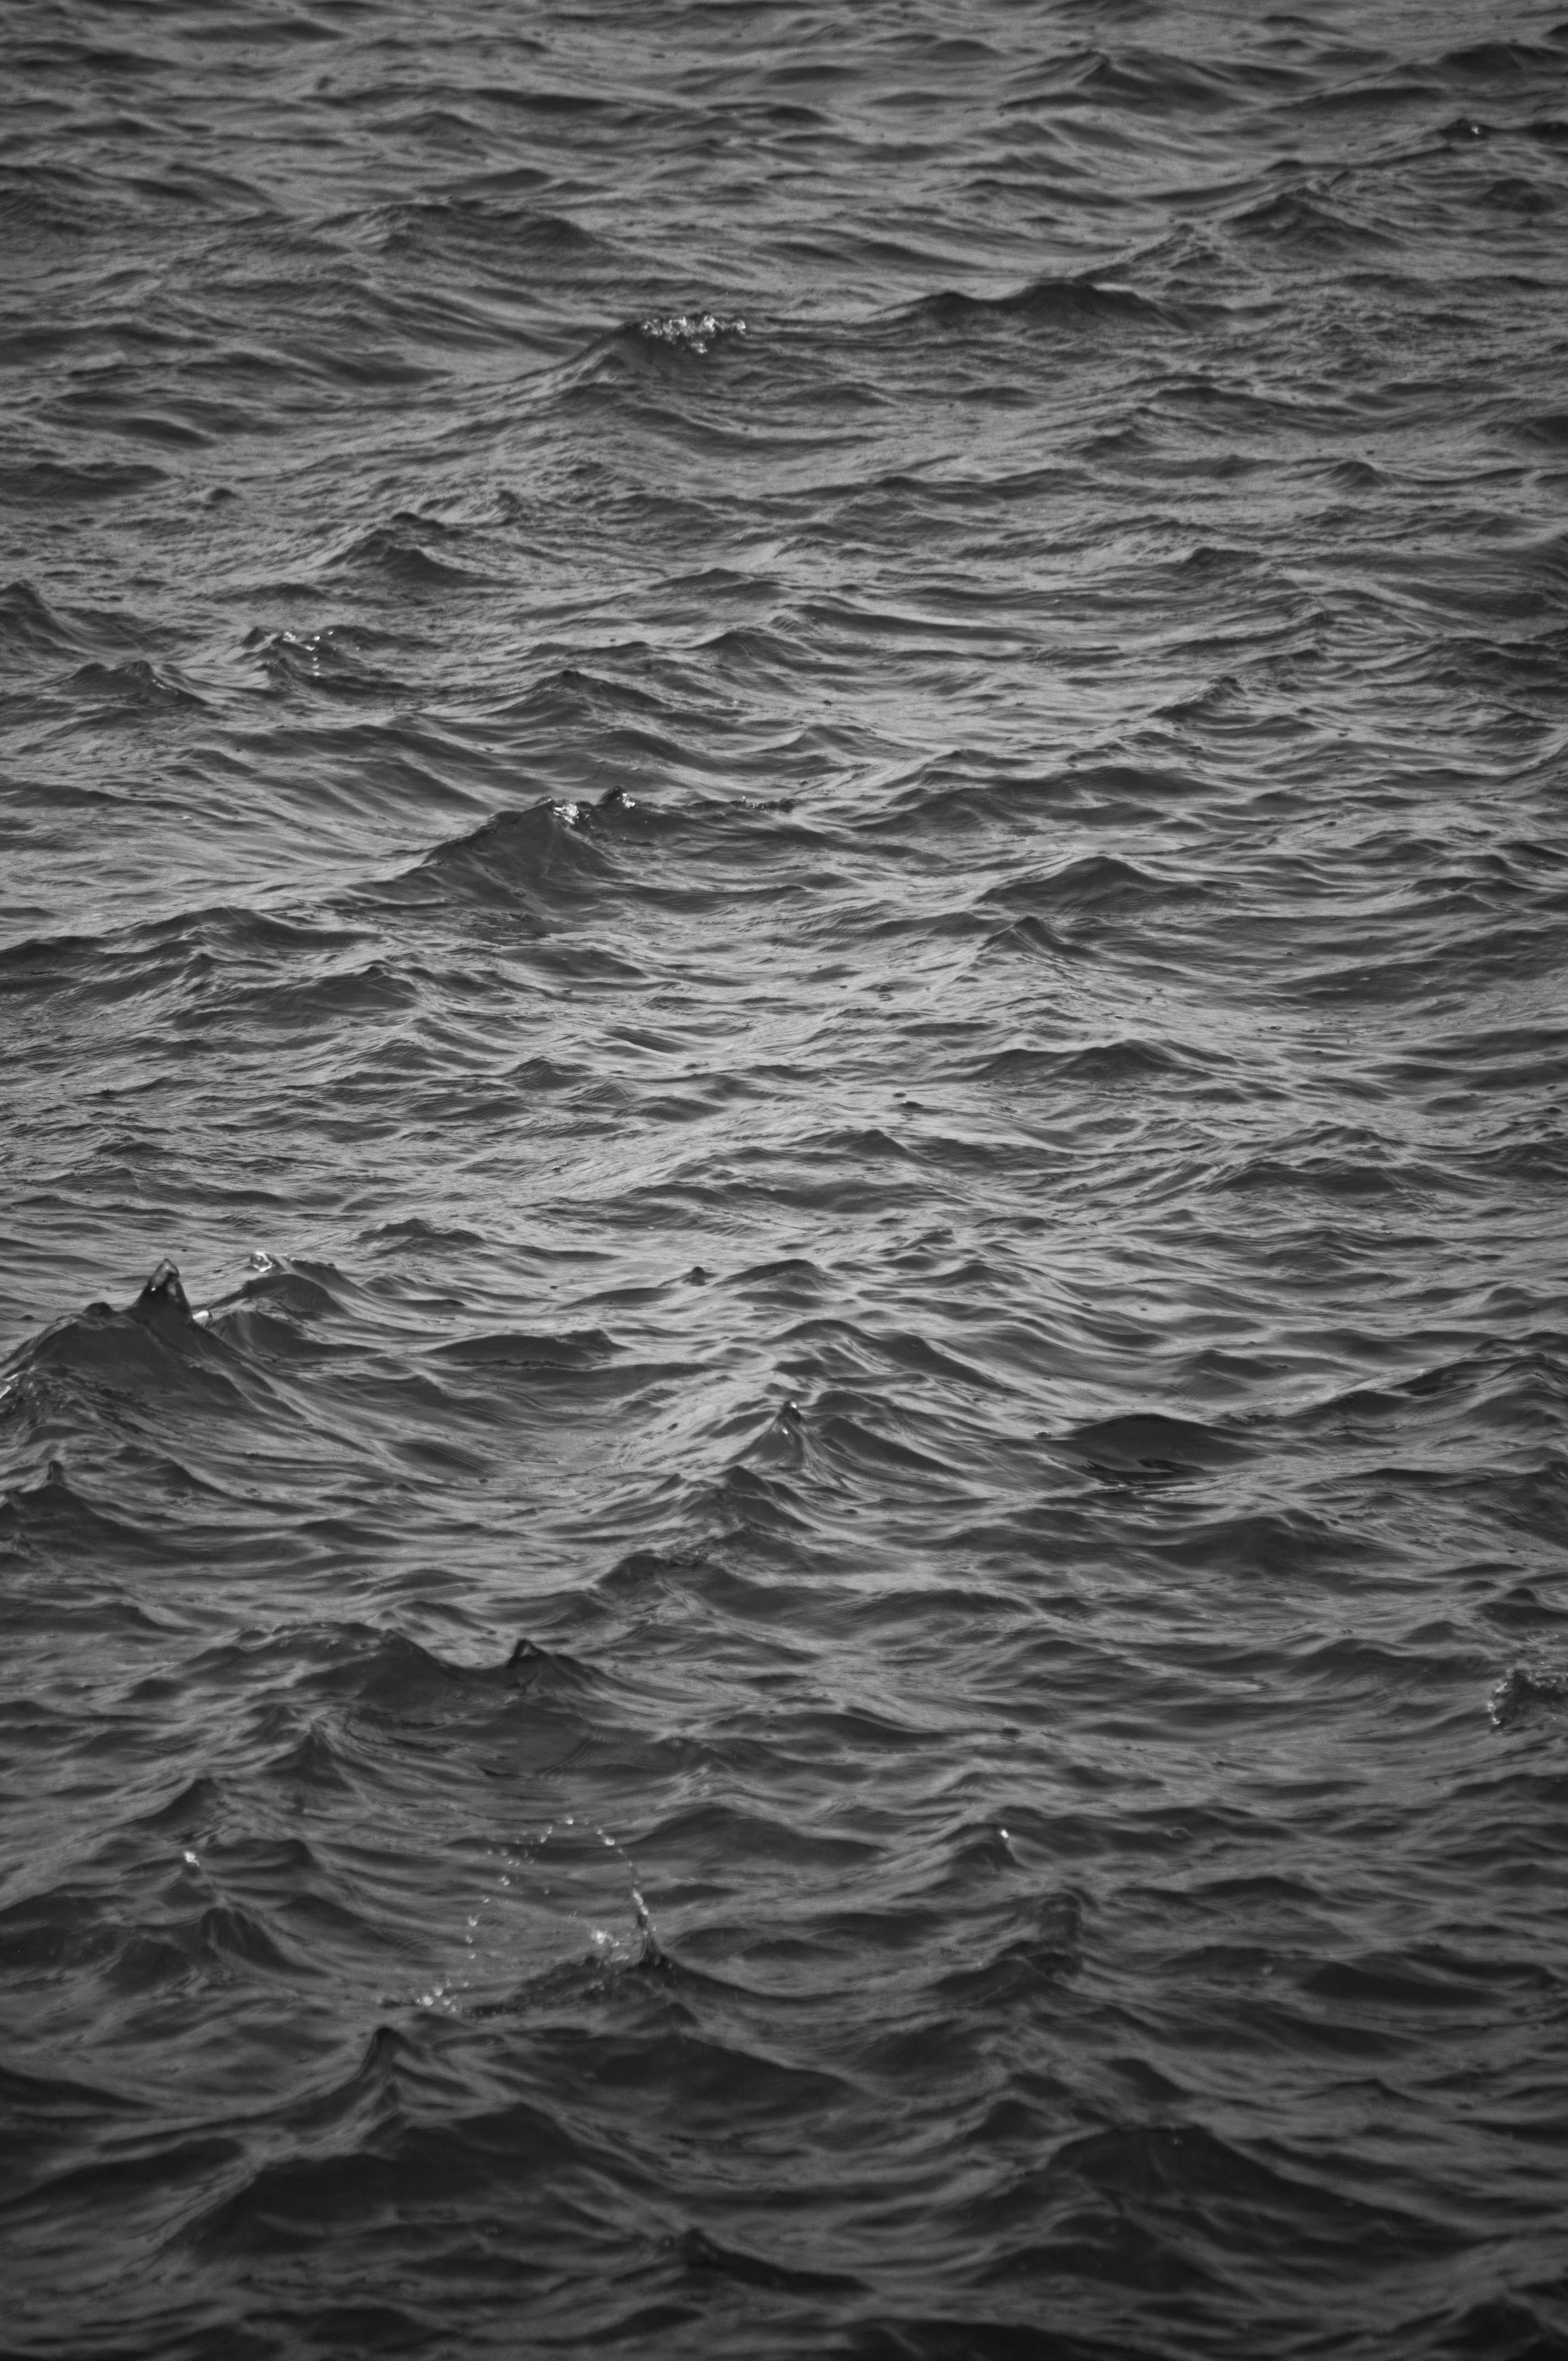 ripples, ripple, nature, water, waves, bw, chb